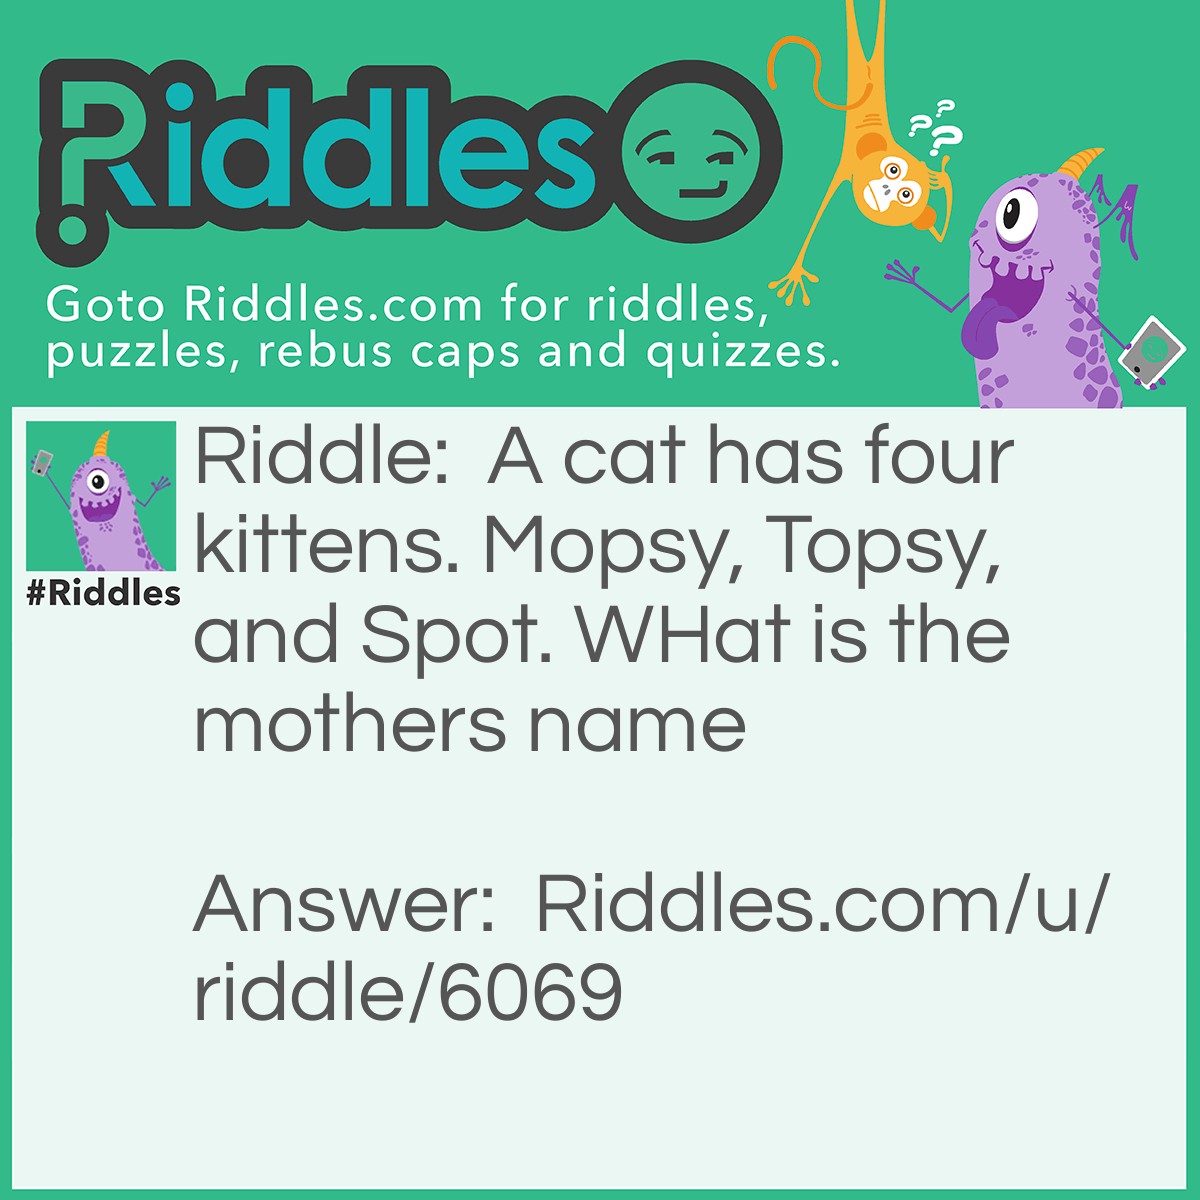 Riddle: A cat has four kittens. Mopsy, Topsy, and Spot. WHat is the mothers name Answer: The mothers name is what! There is no punctuation after the sentence, so the moms name is what.